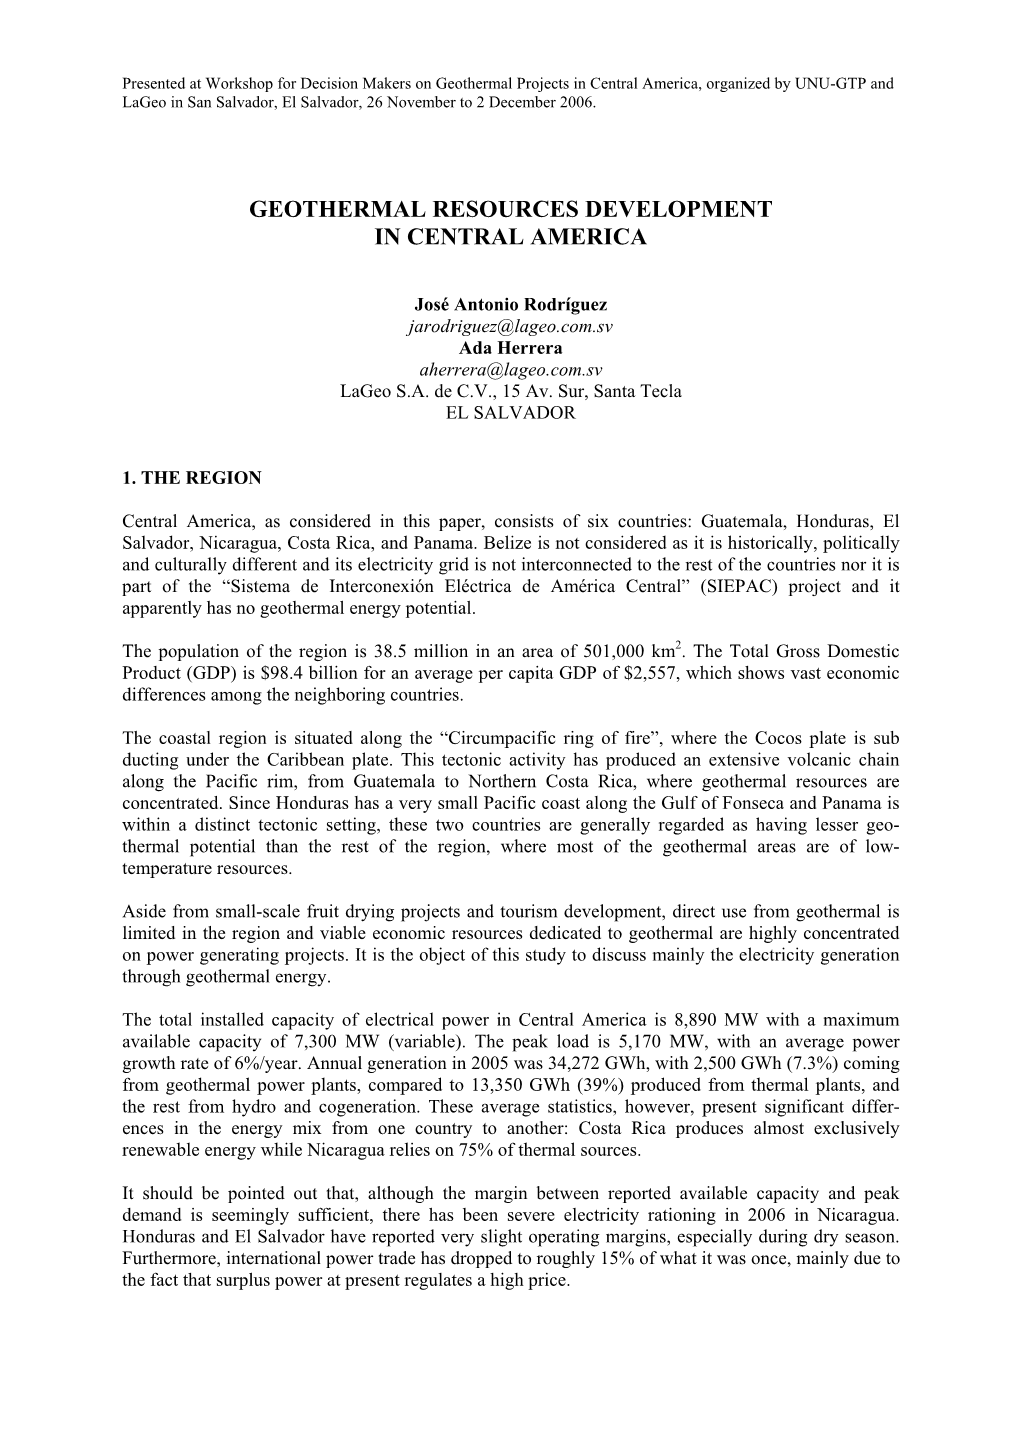 Geothermal Resources Development in Central America